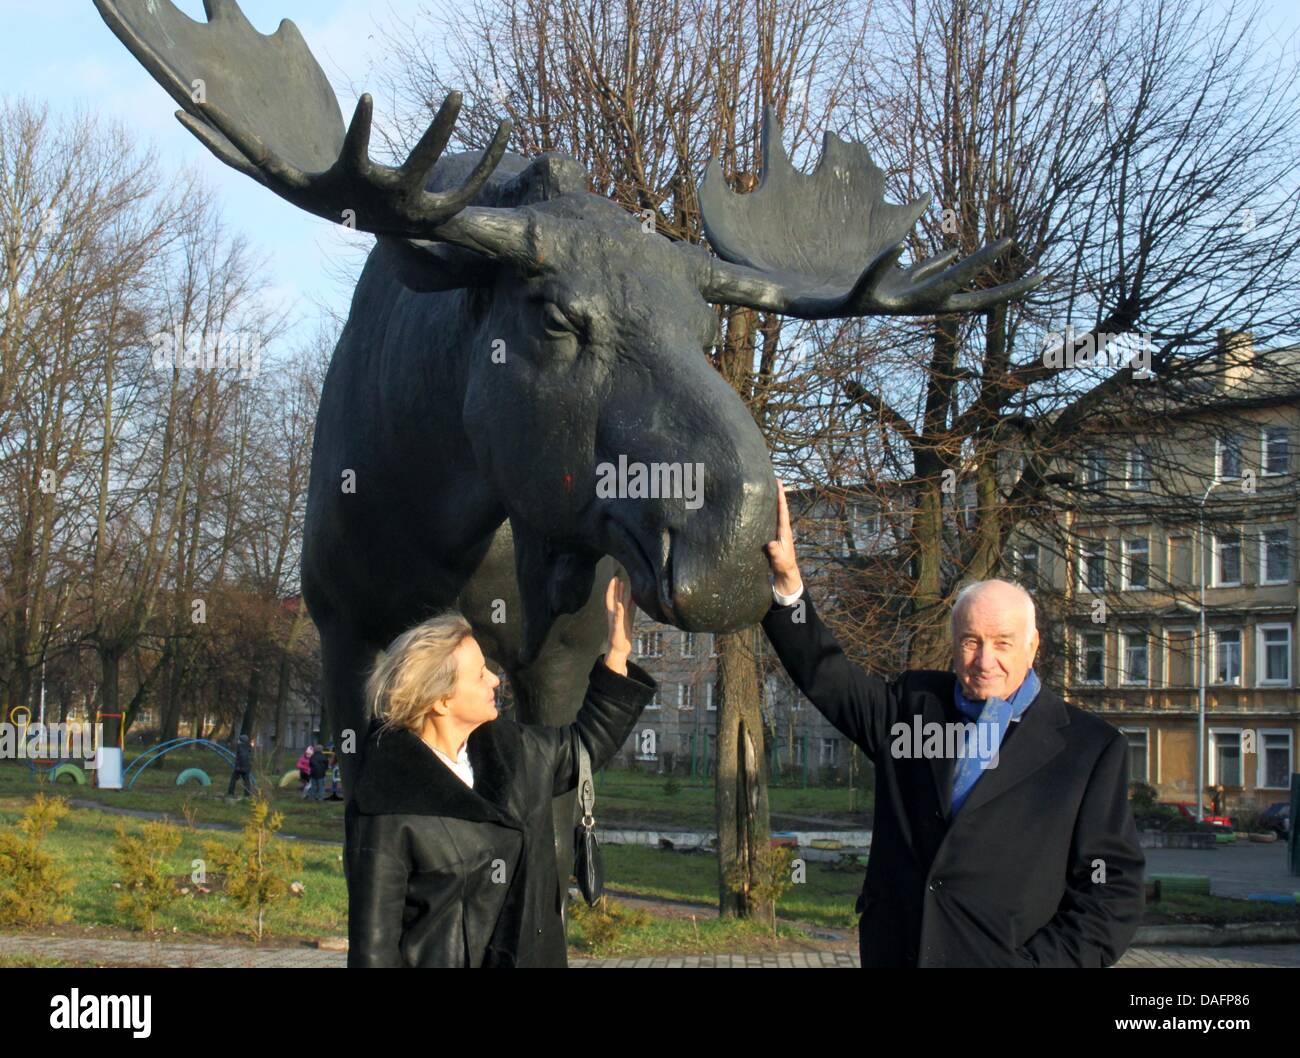 German actor Armin Mueller-Stahl and his wife Gabriele stand next to a statue of an elk, which is the landmark of his city of birth 'Tilsit', named Sovetsk today, Russia, 07 December 2011. The artist and actor visited the city for the first time in 73 years to receive an award as honorary citizen of the town on 07 December 2011. Photo: Thoralf Plath Stock Photo